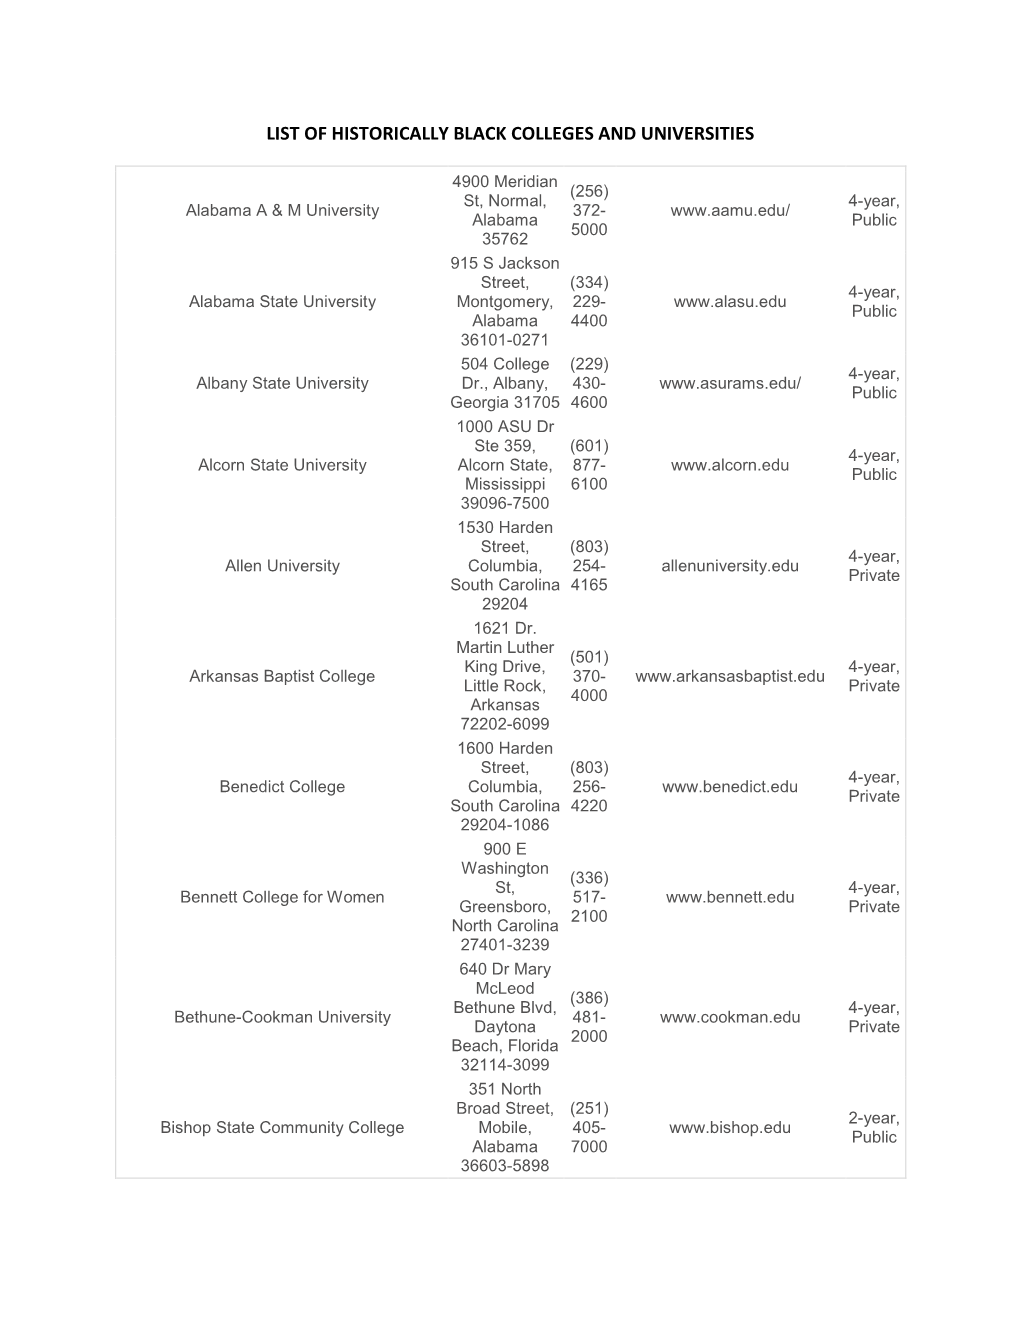 List of Historically Black Colleges and Universities